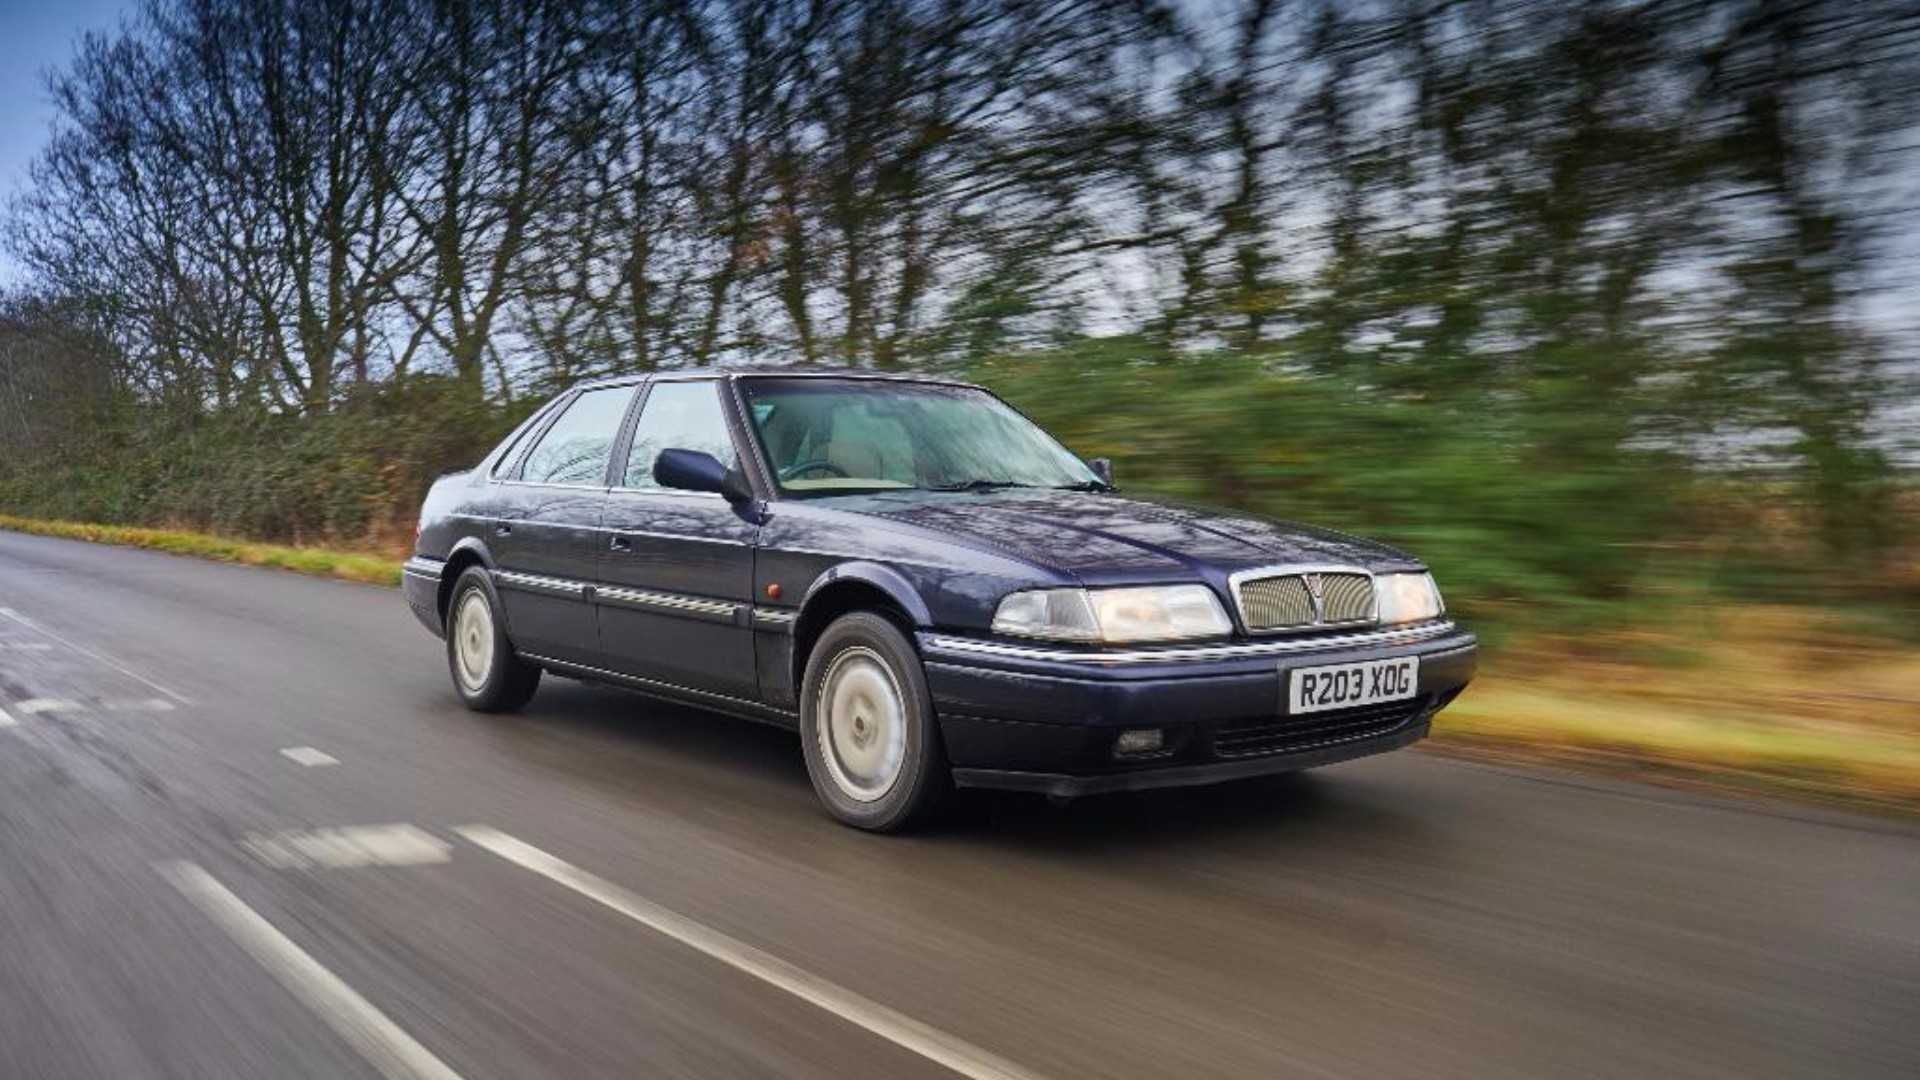 Rover 800 on the road